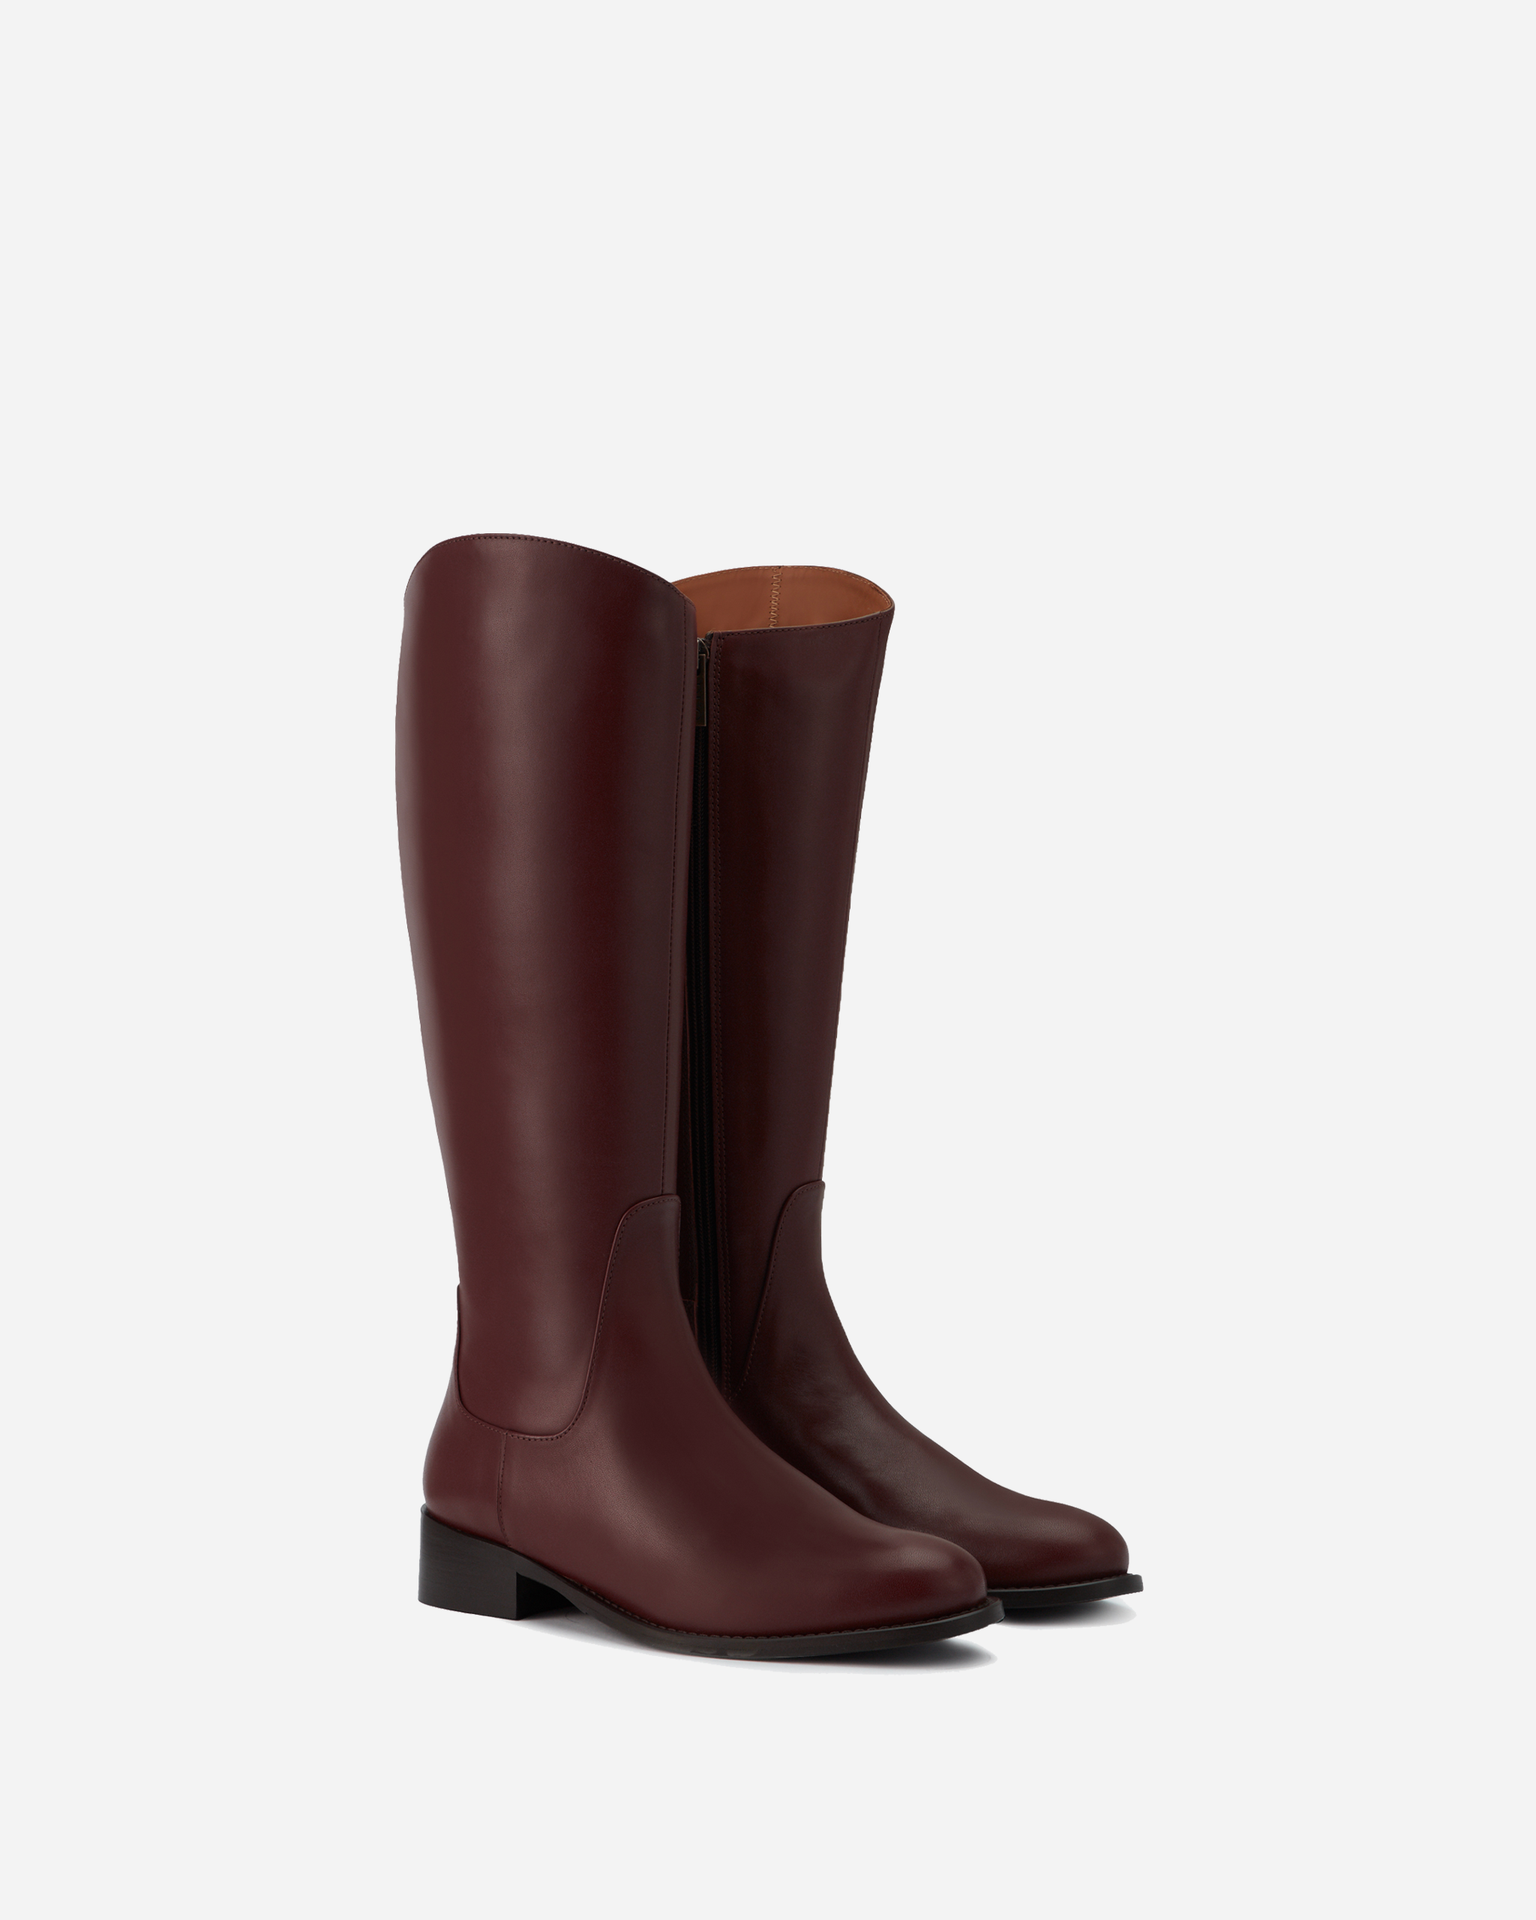 Verity Knee High Boots in Burgundy Leather – DuoBoots